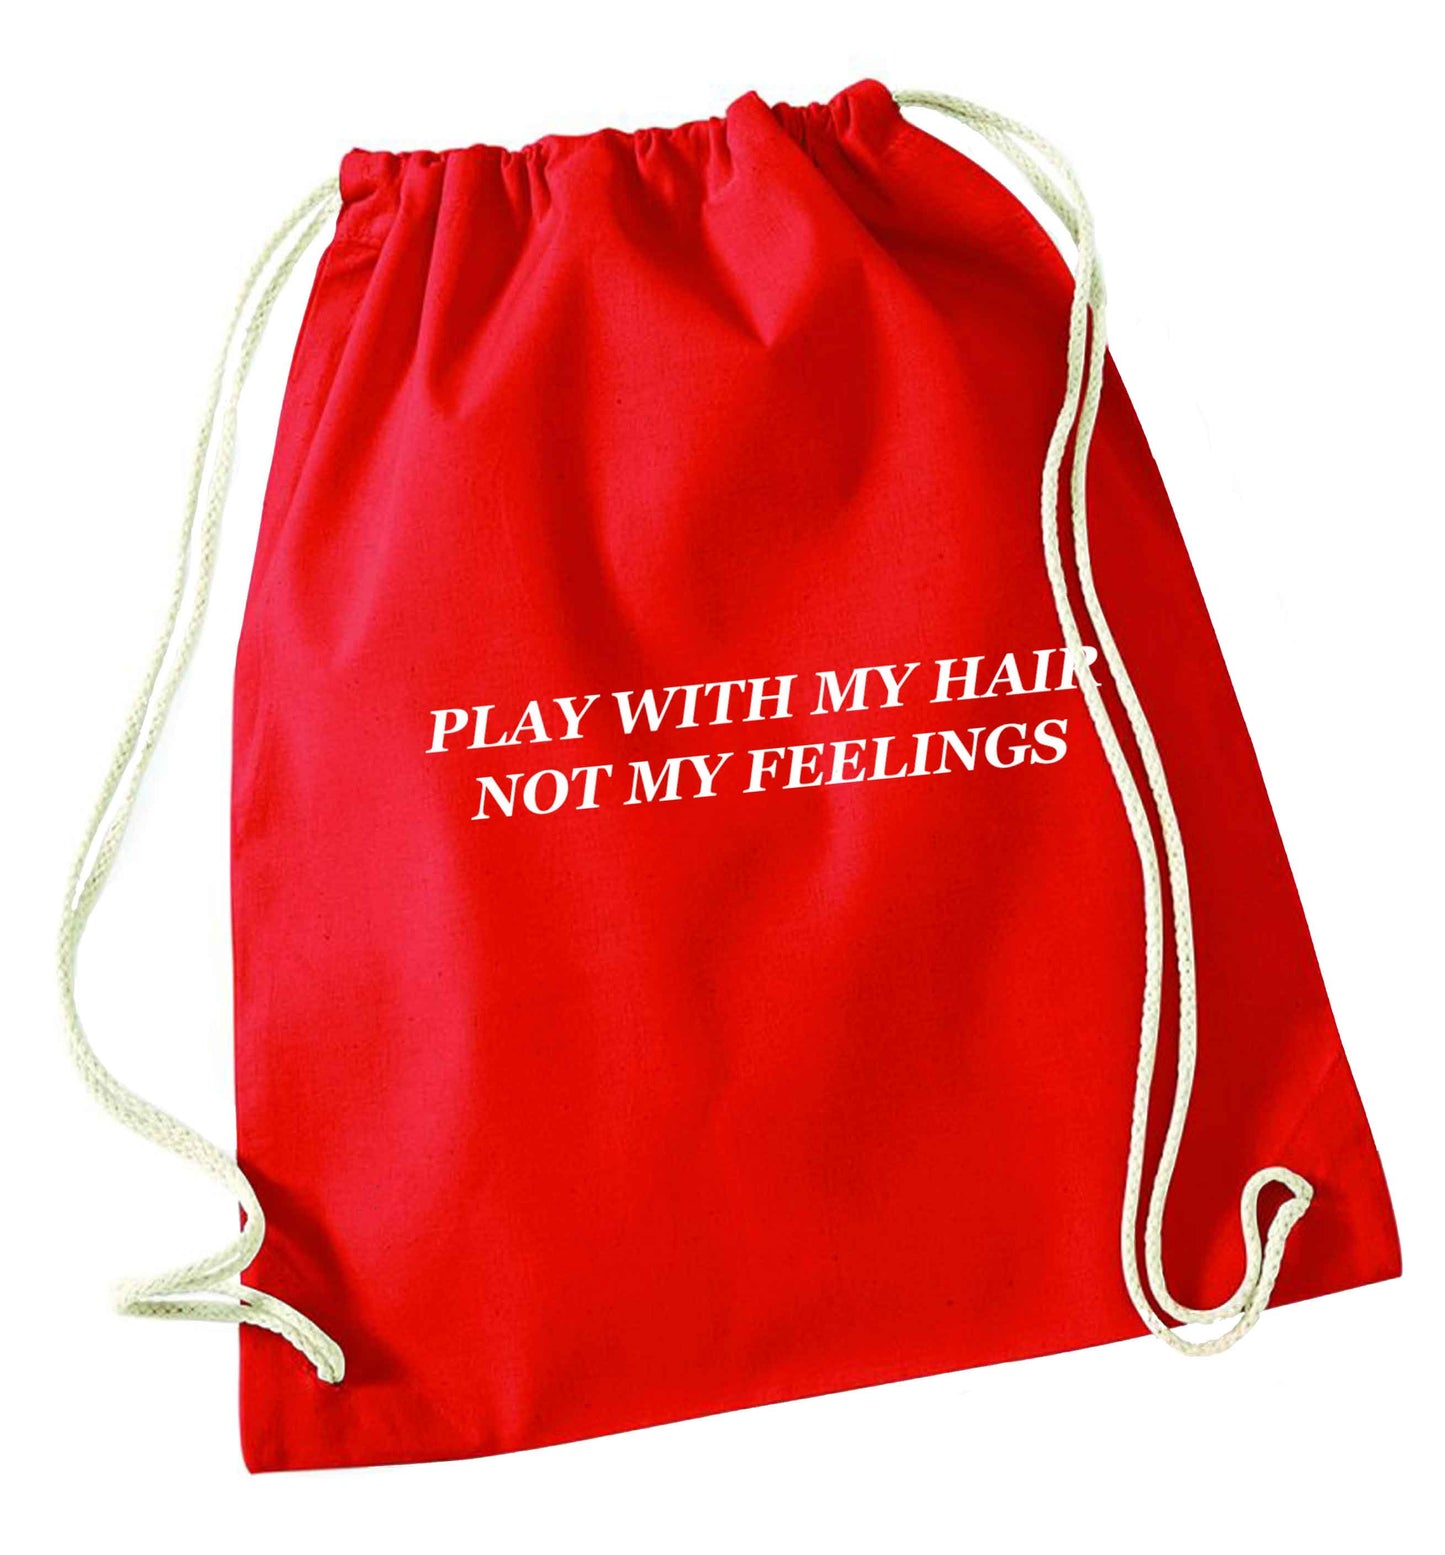 Play with my hair not my feelings red drawstring bag 